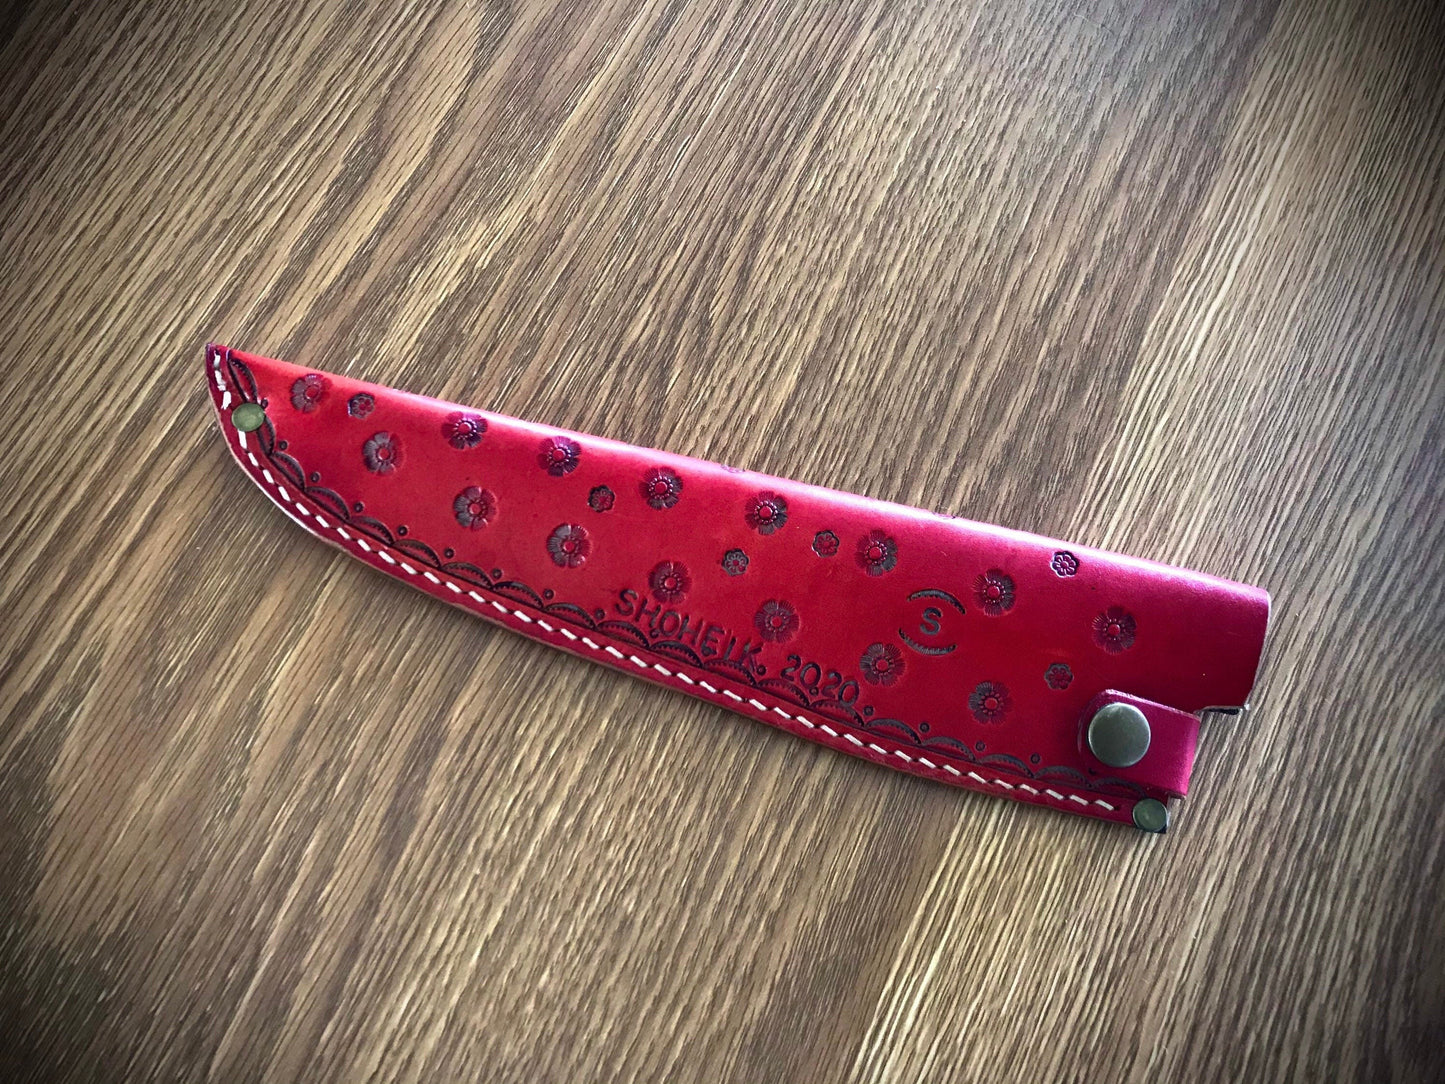 Hand tooled leather Kitchen sheath - Flowers